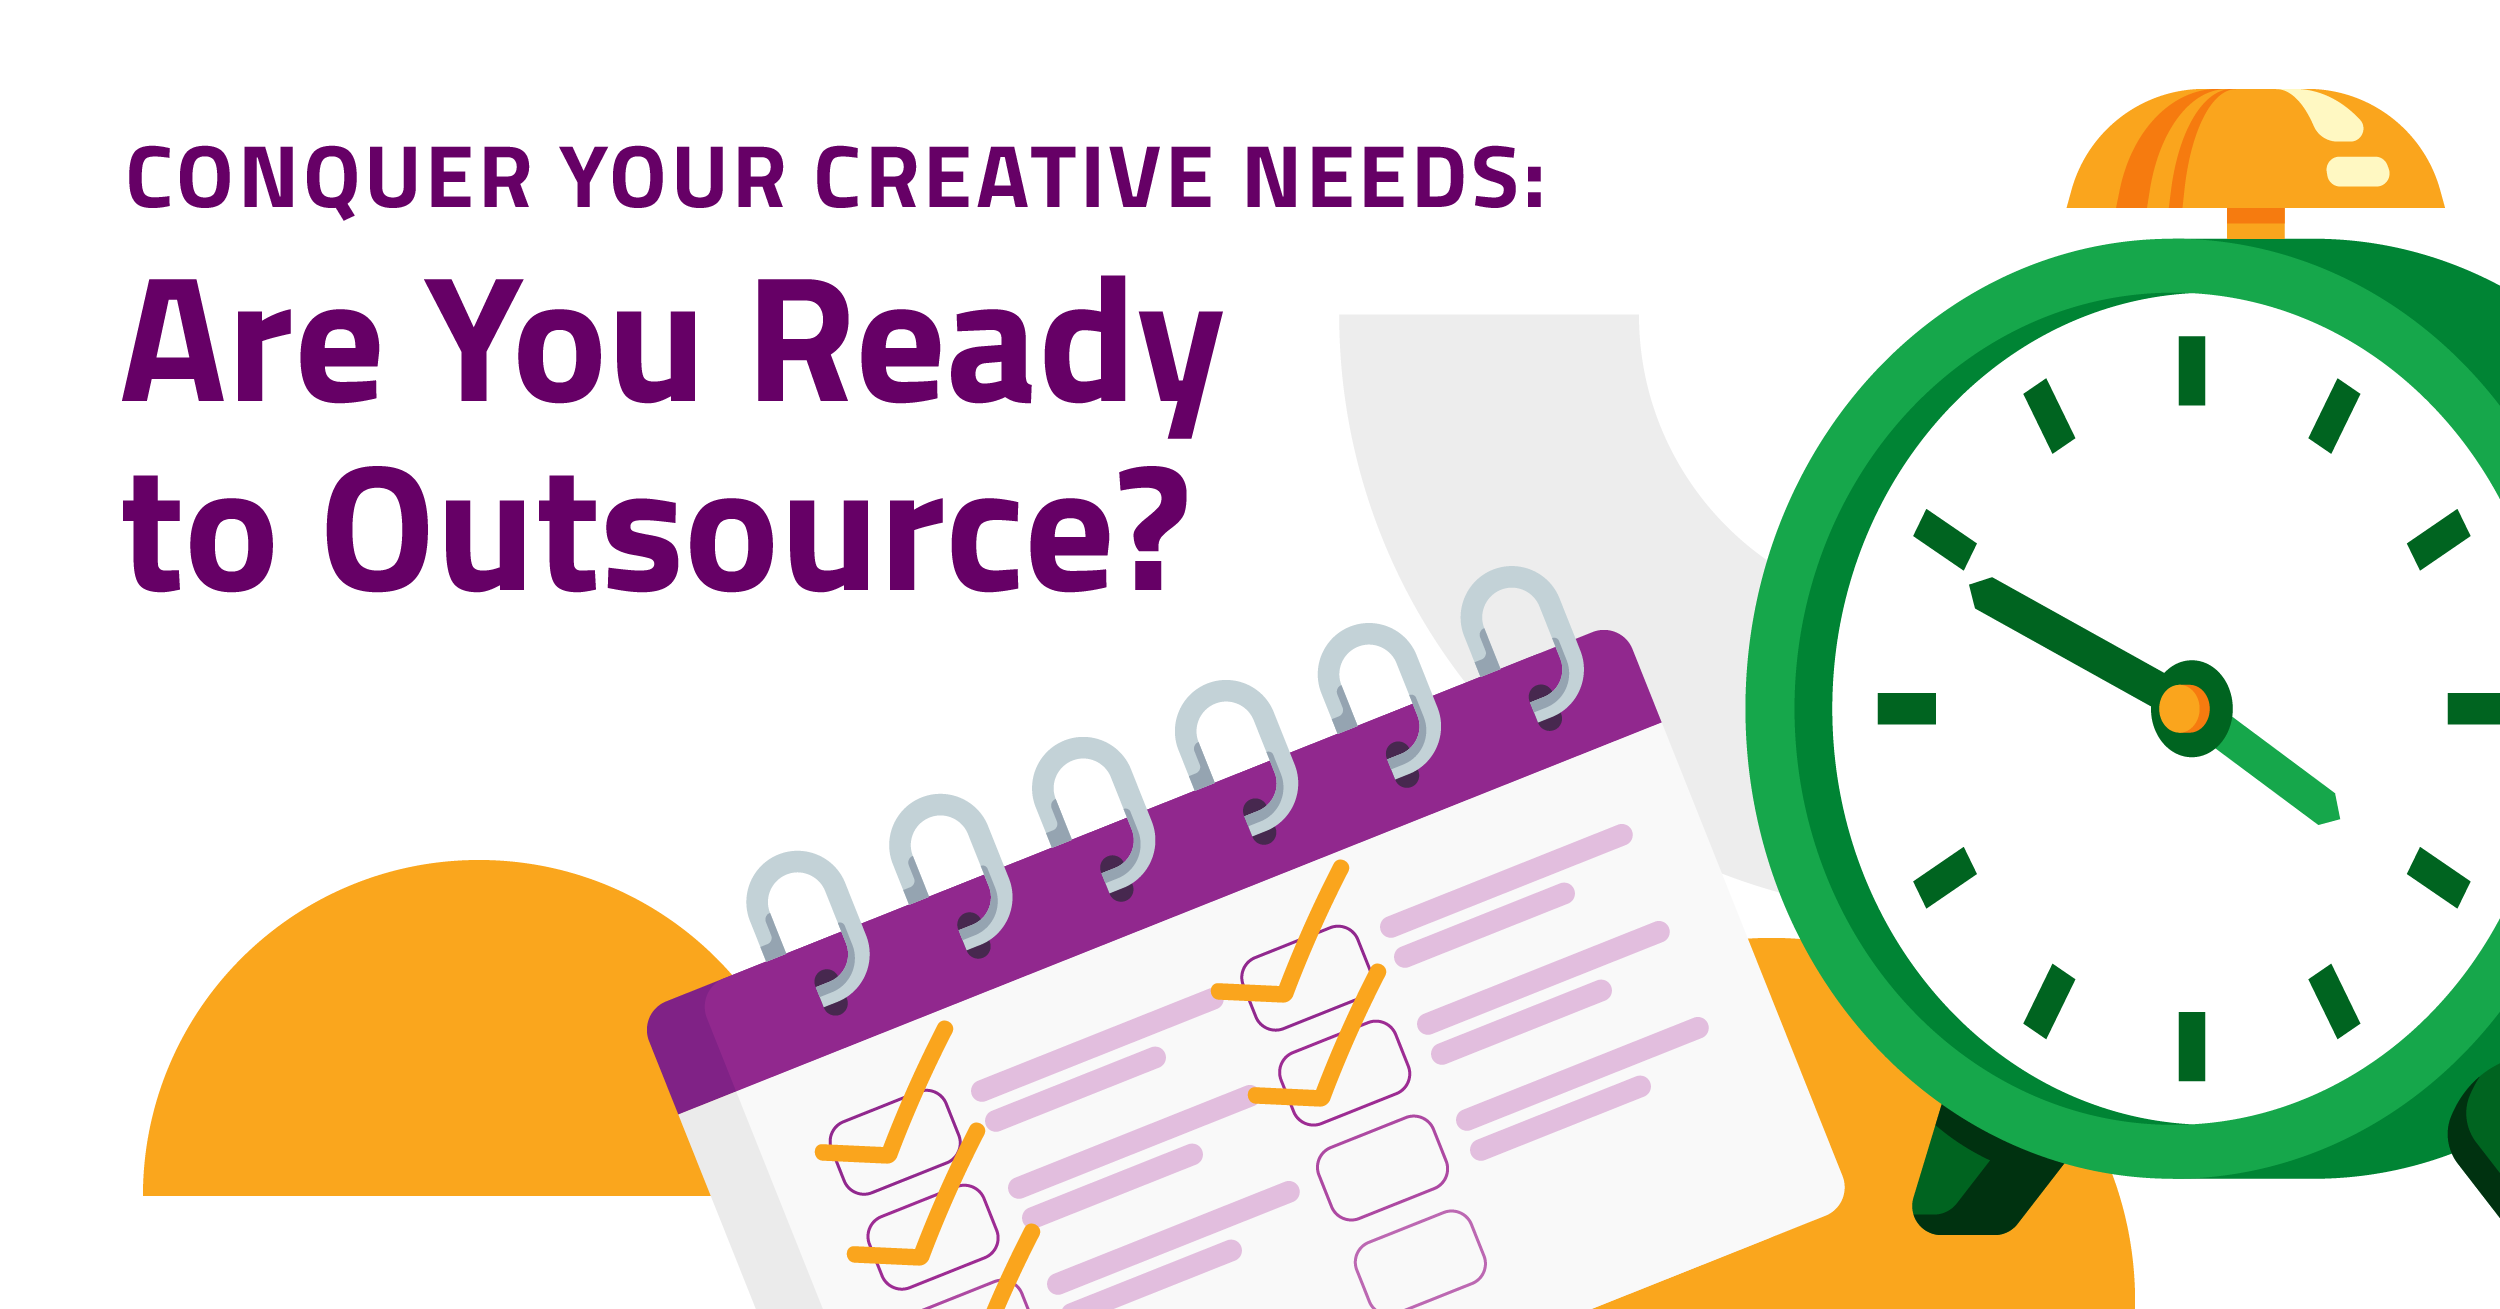 Conquer Your Creative Needs: Are You Ready to Outsource?